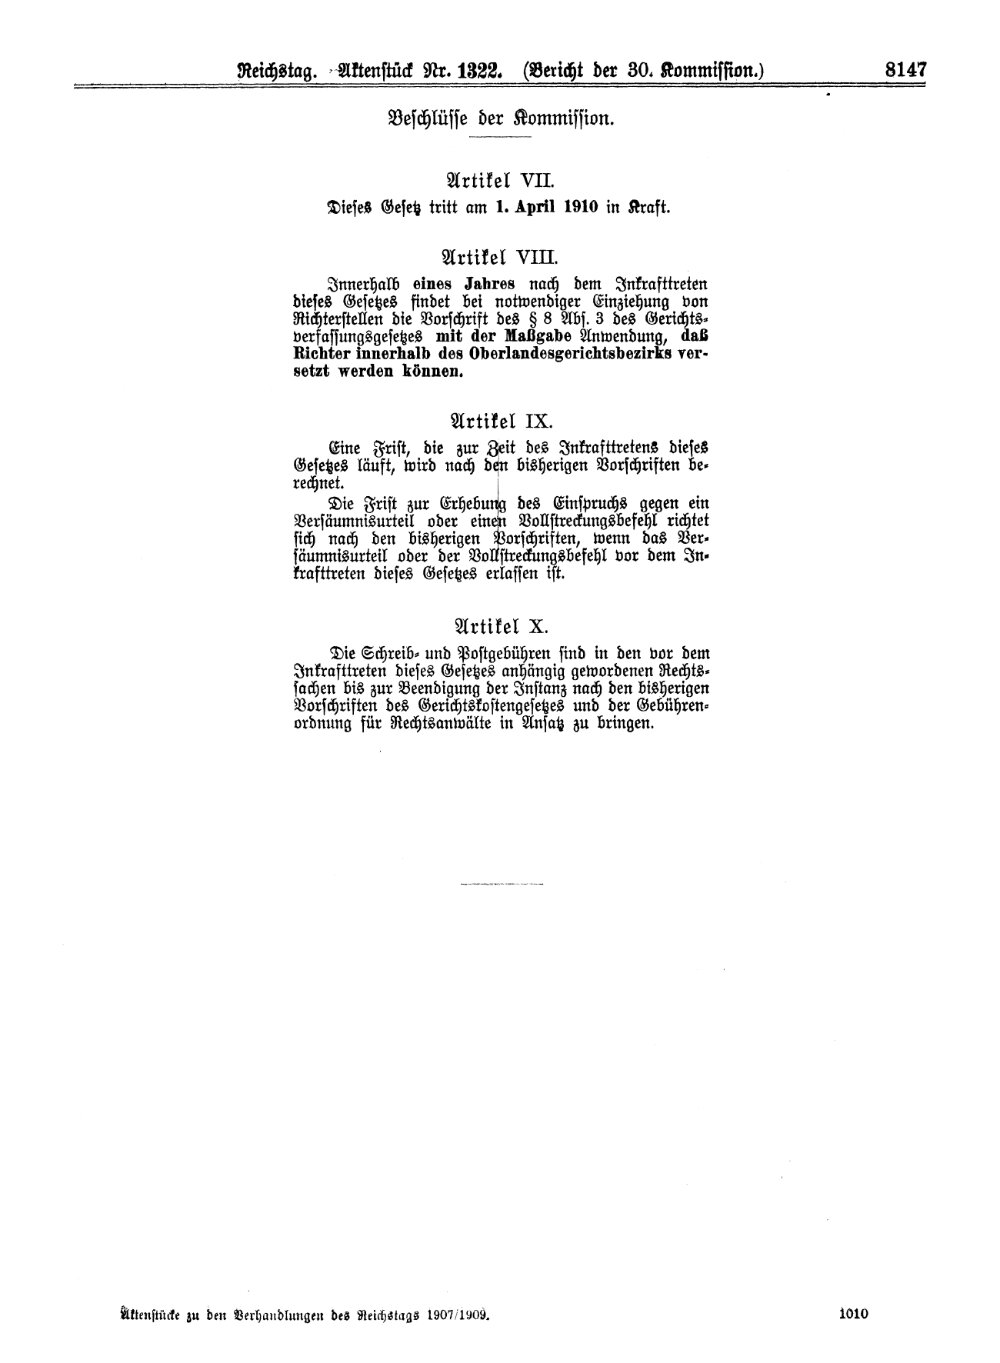 Scan of page 8147